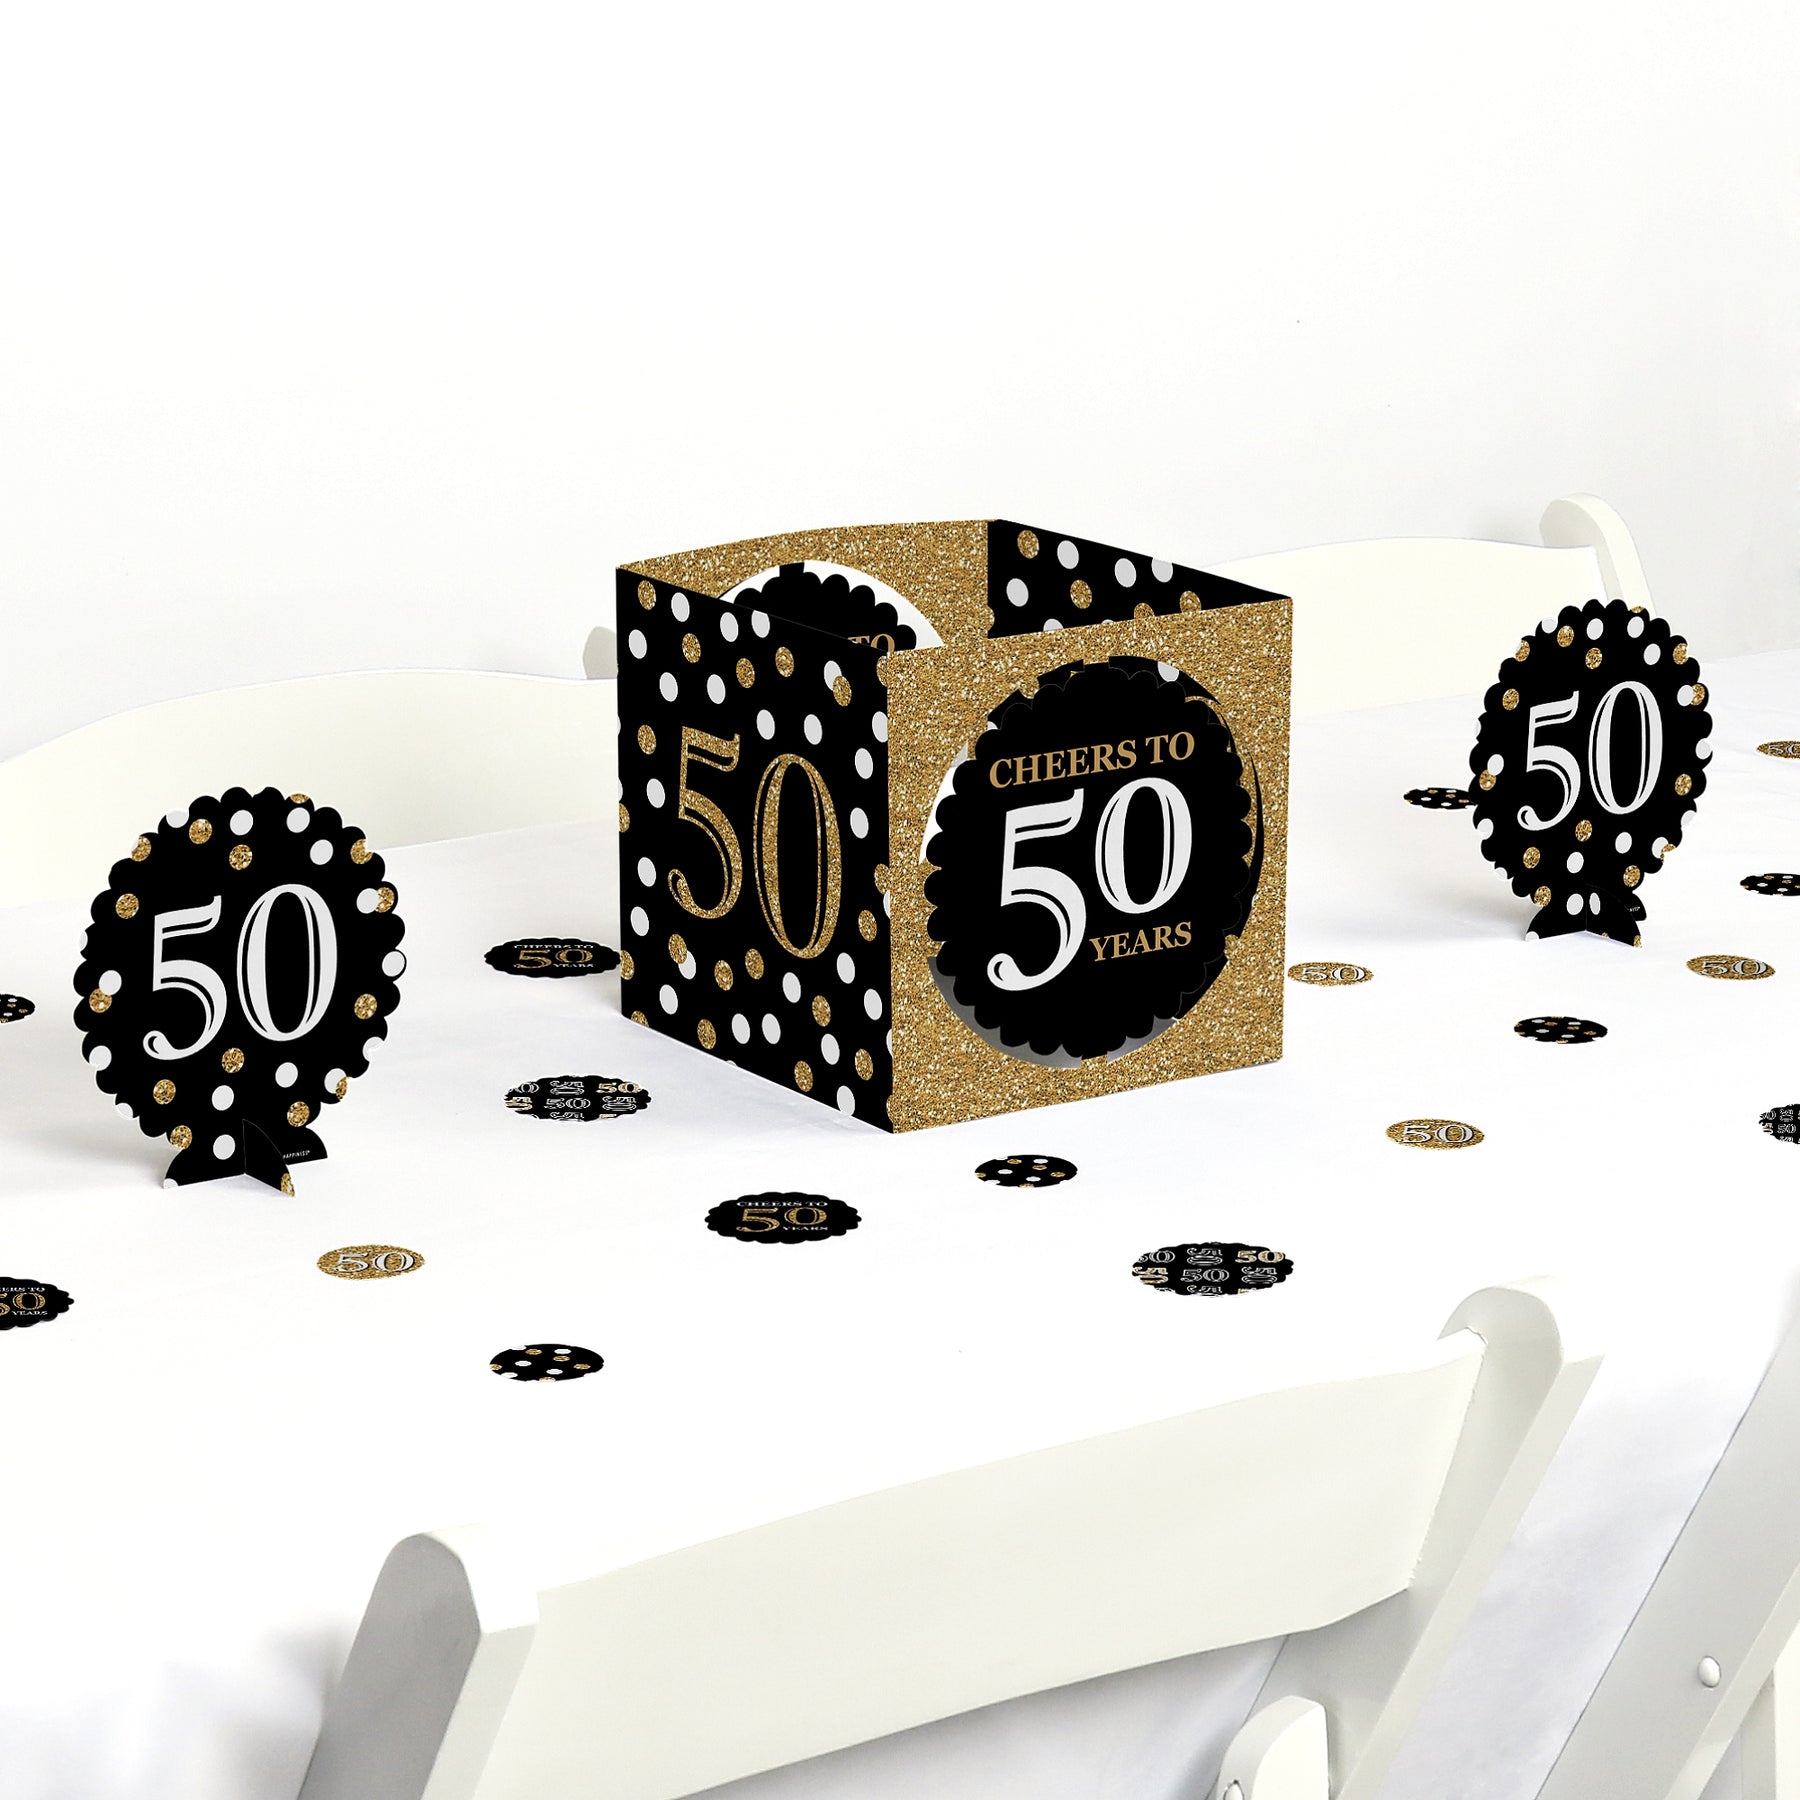 50th Birthday Gift Ideas, Decorations for a 50th Birthday Party